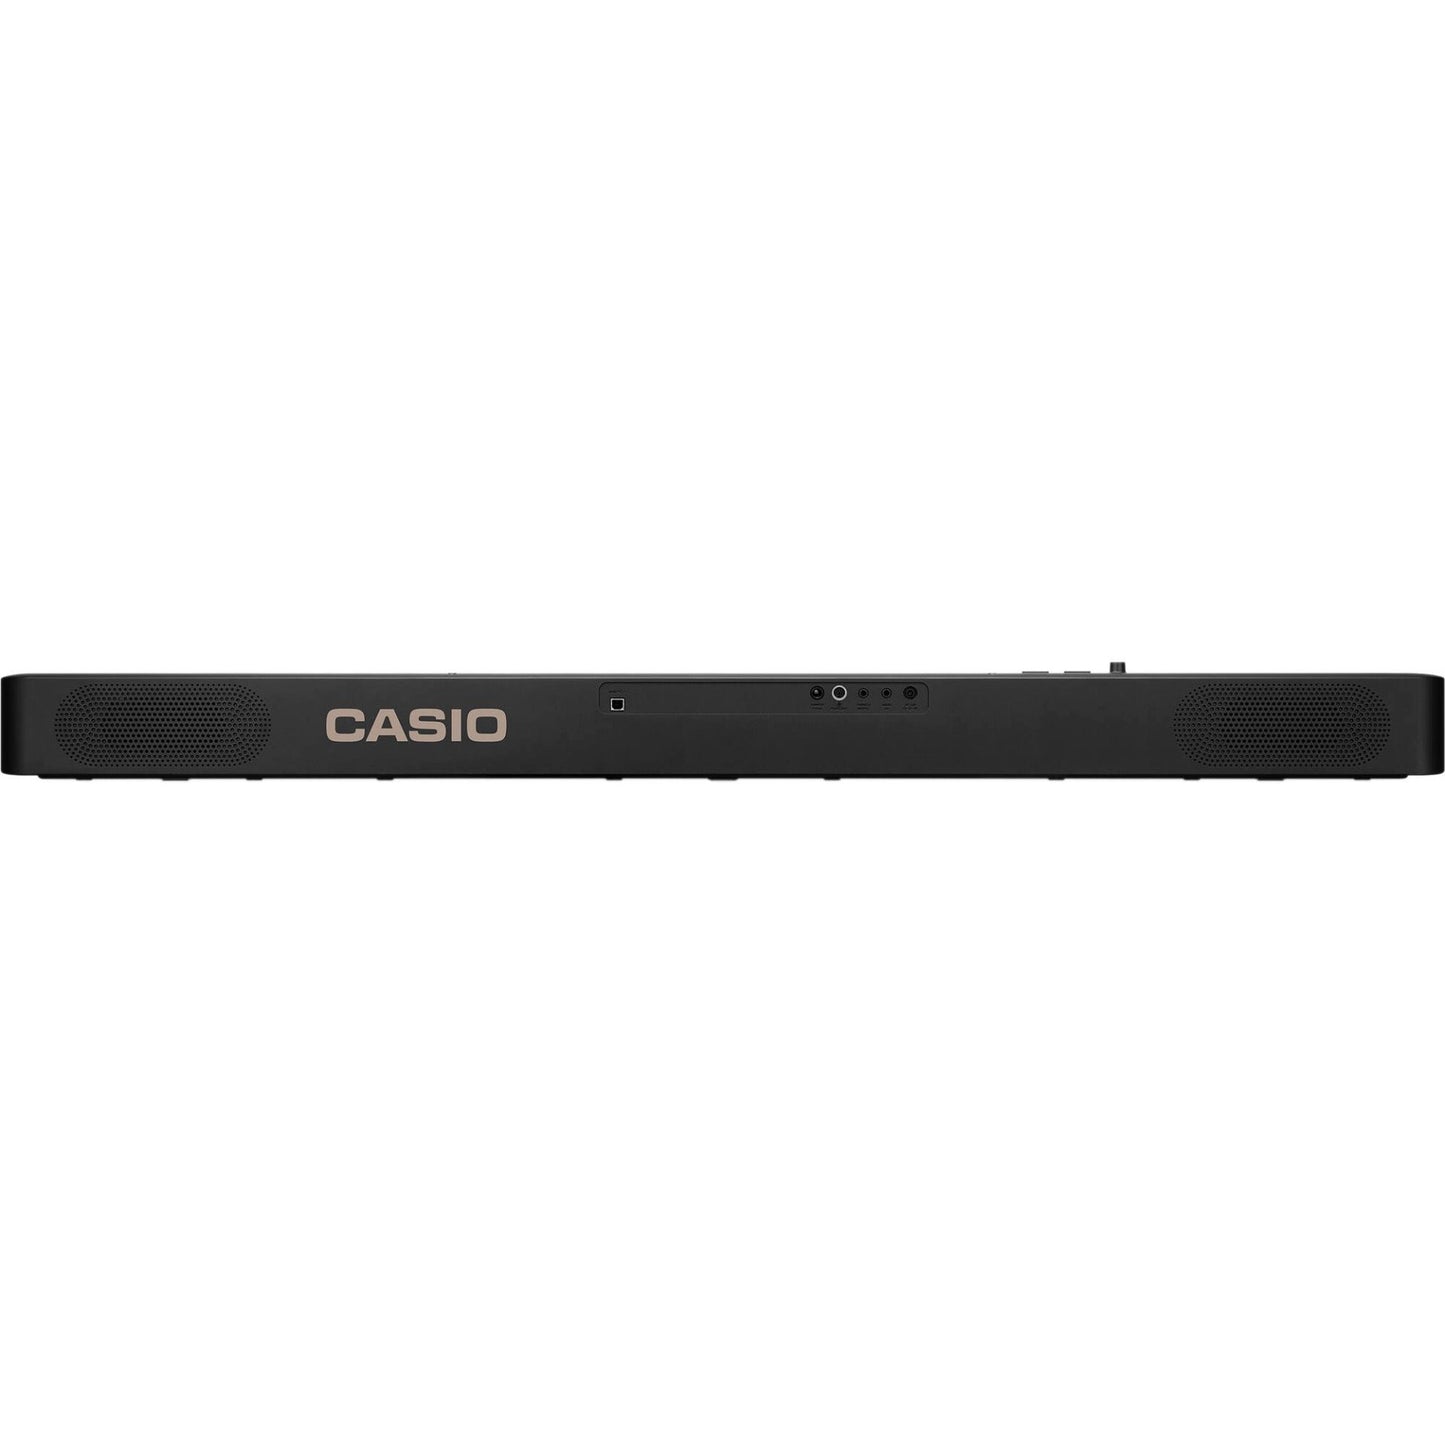 Casio CDP-S160 88 Key Digital Piano - Red with CS46 Stand